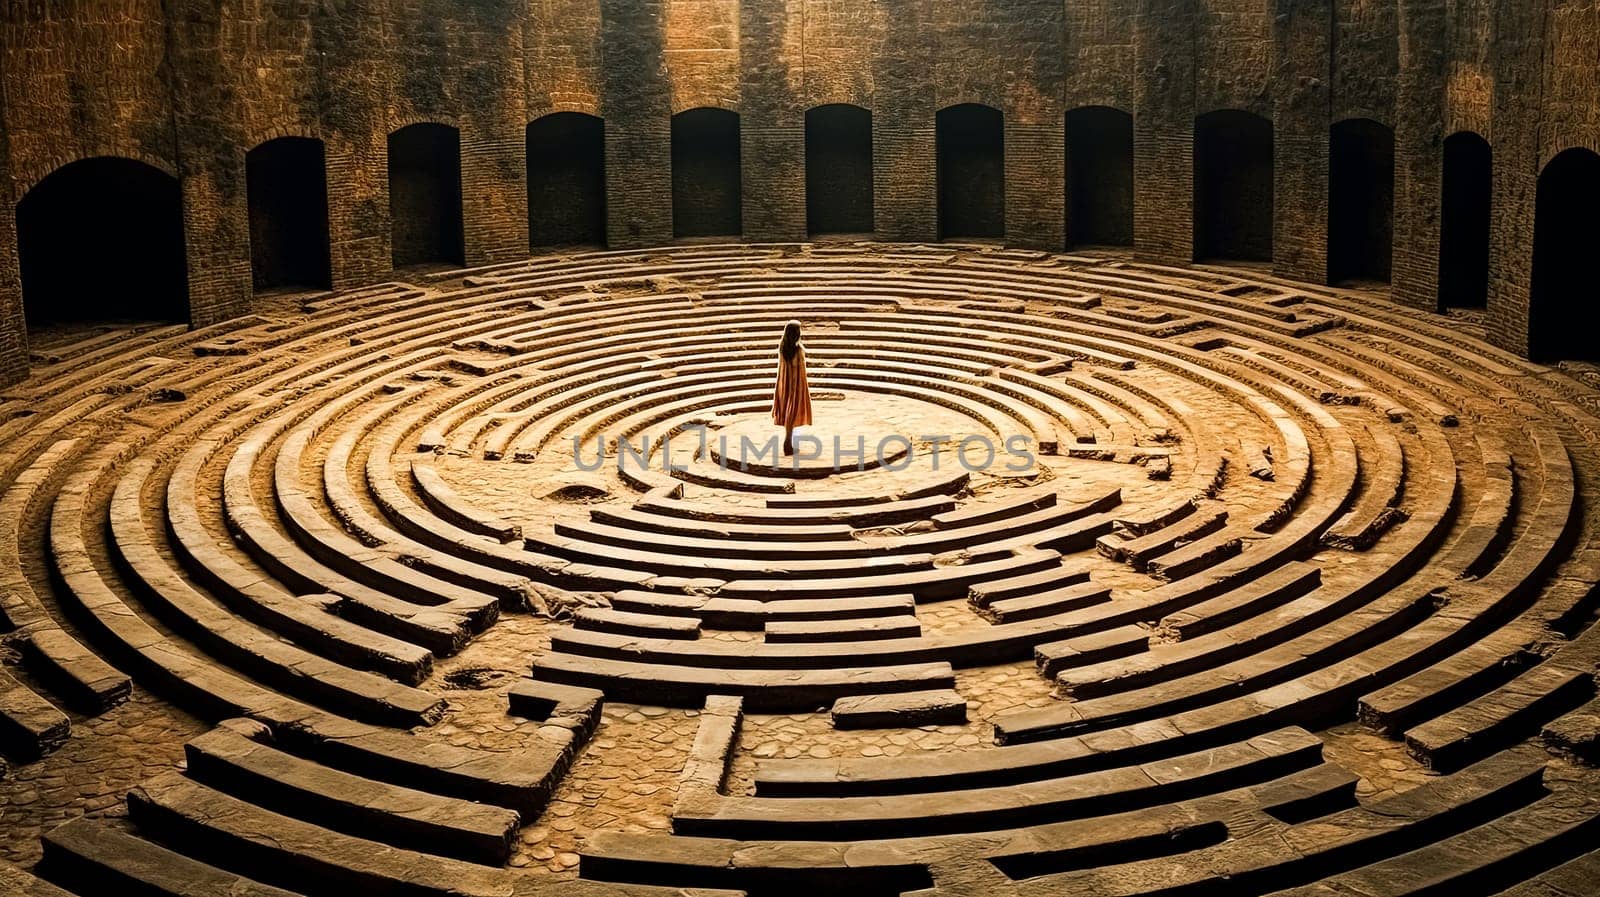 A girl is walking through a maze. The maze is surrounded by trees and has a circular shape